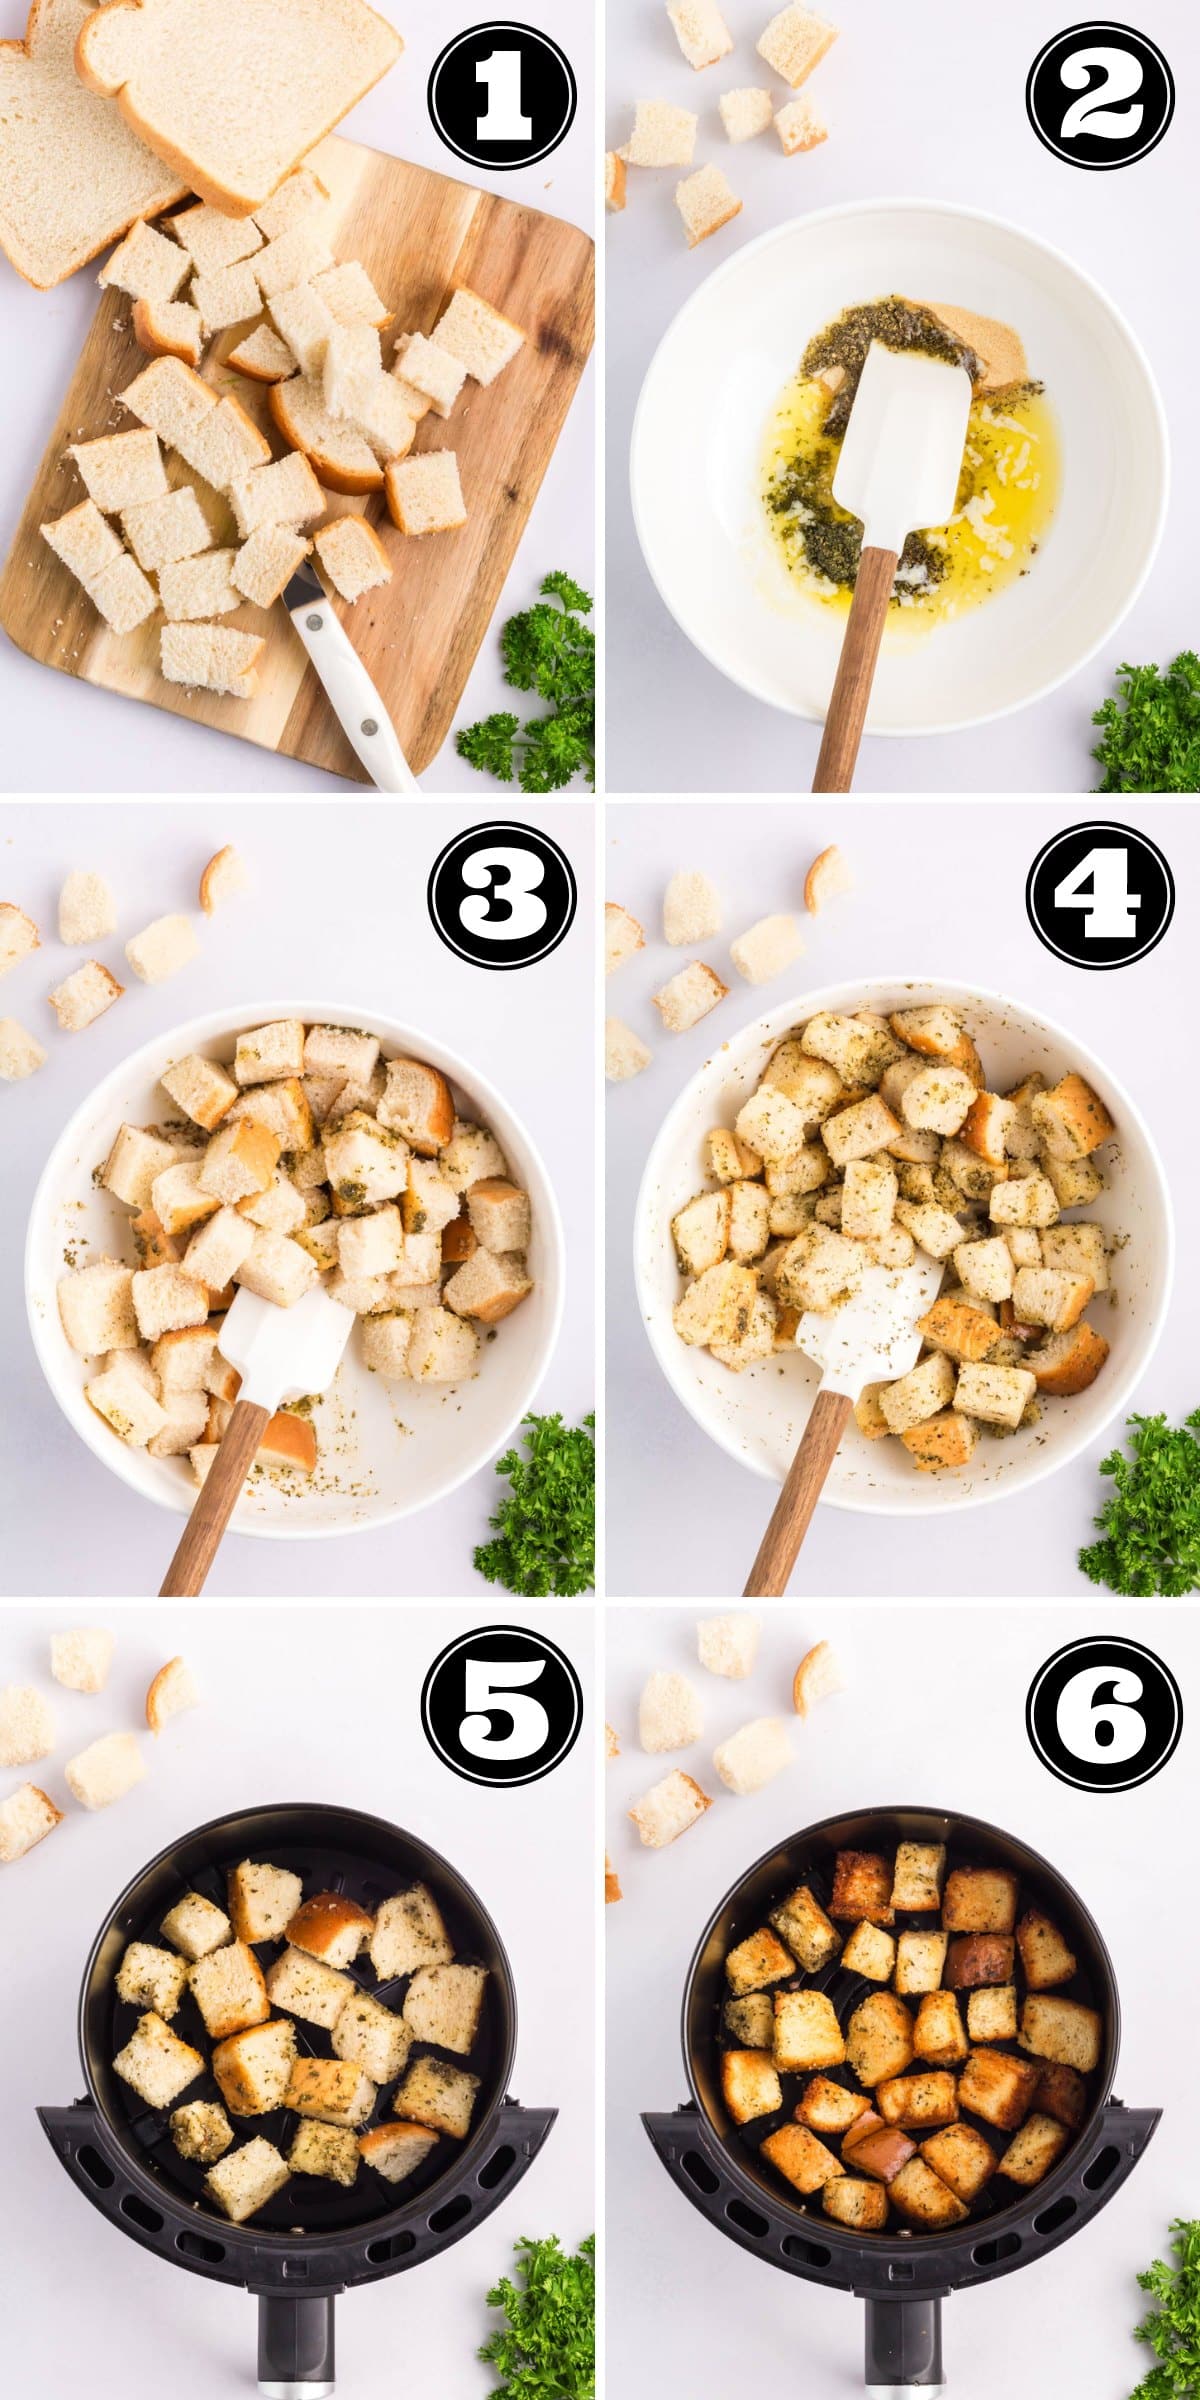 Collage image showing steps to air fry homemade croutons.